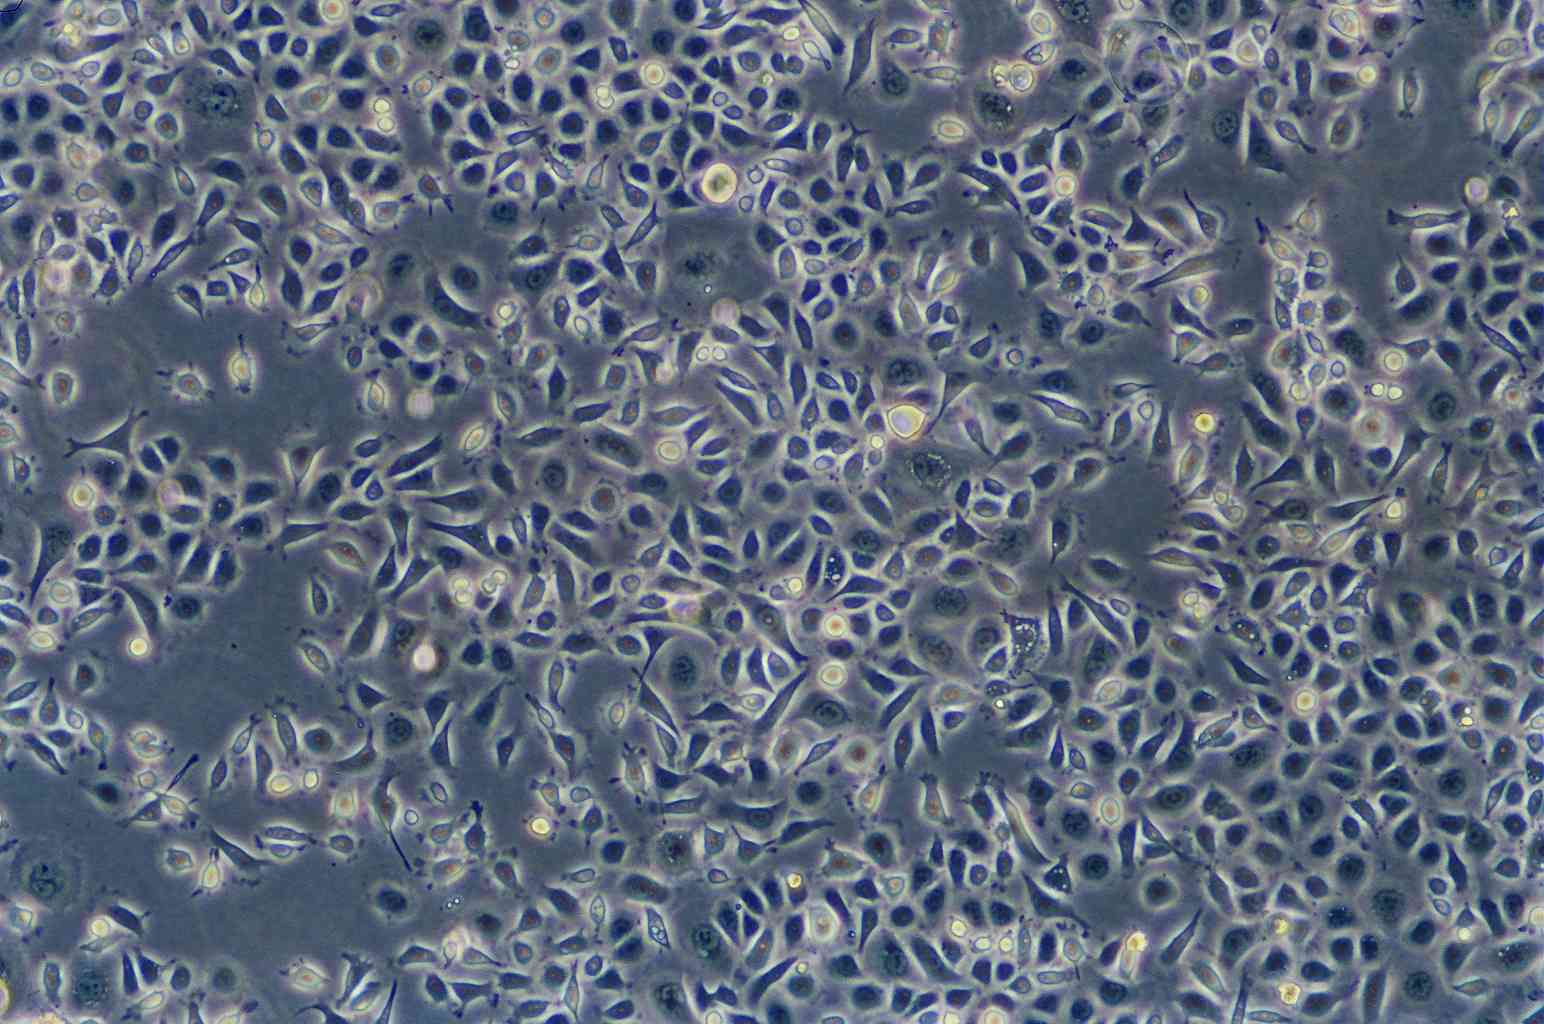 NCL-H548 epithelioid cells人胰腺癌细胞系